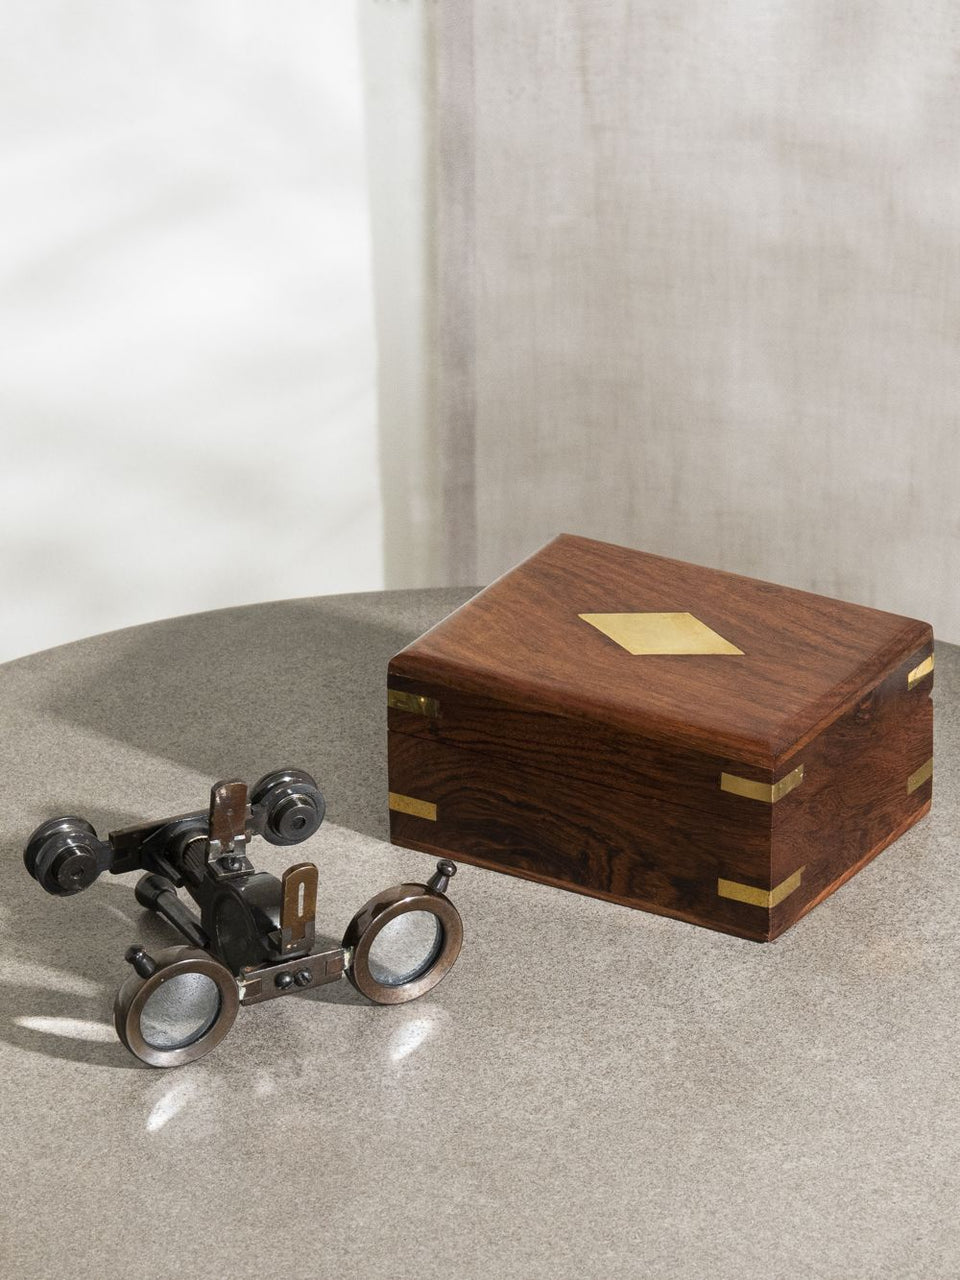 Wooden Box with Binoculars and Compass